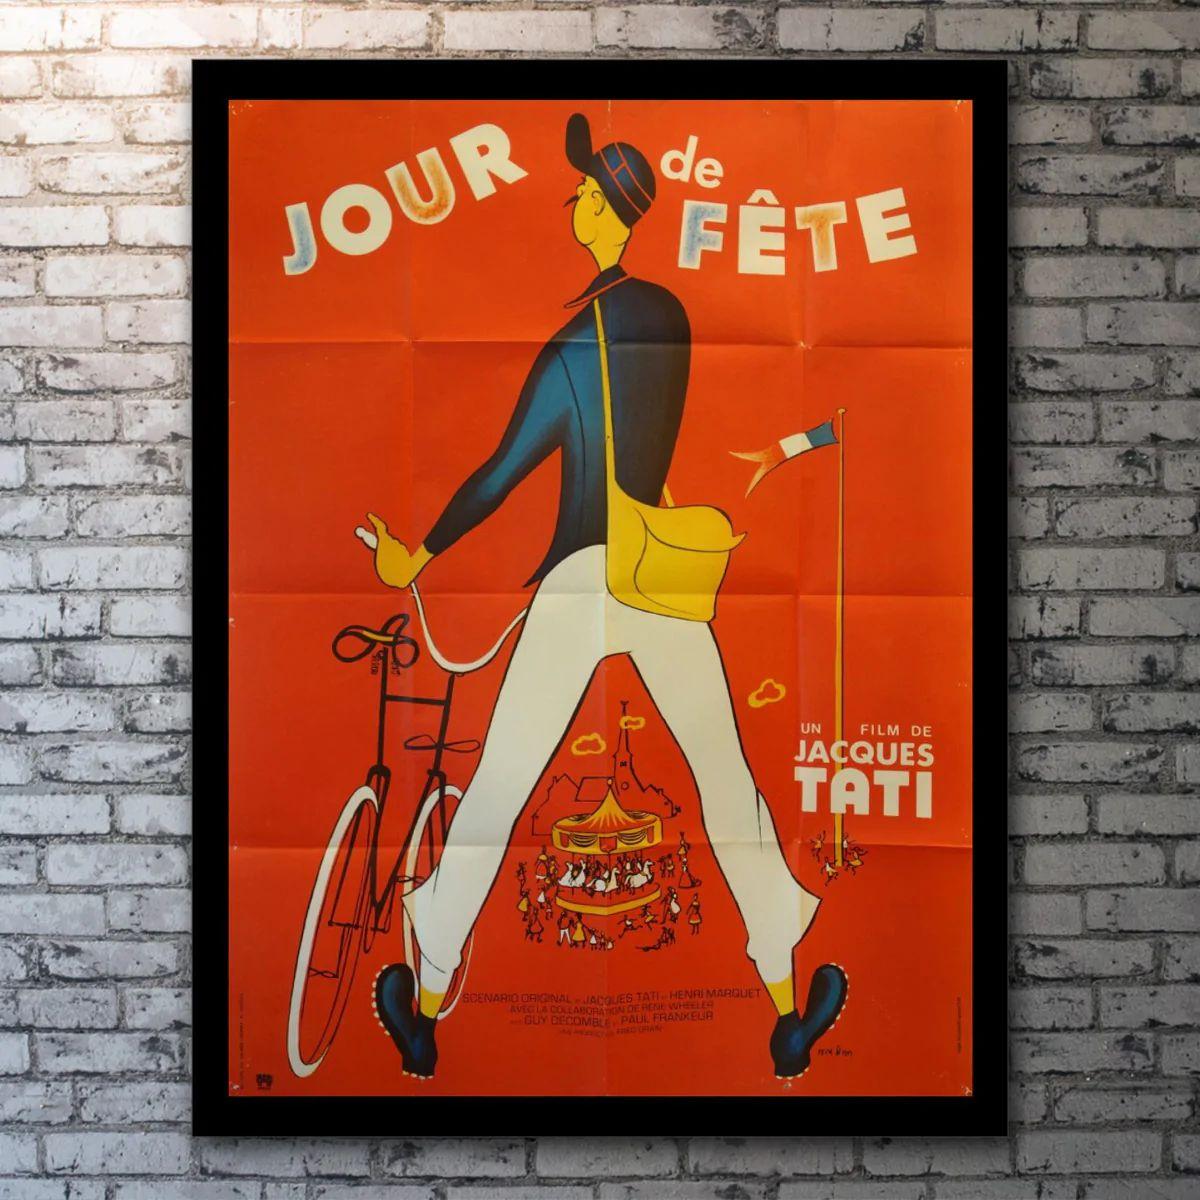 Jour De Fete, Unframed Poster, 1970's RR

Original One Panel (47 X 63 Inches). A village postman with no sense of humour delivers his mail via bicycle on the day the travelling fair comes to town. He is disrupted by a short film about US speed and